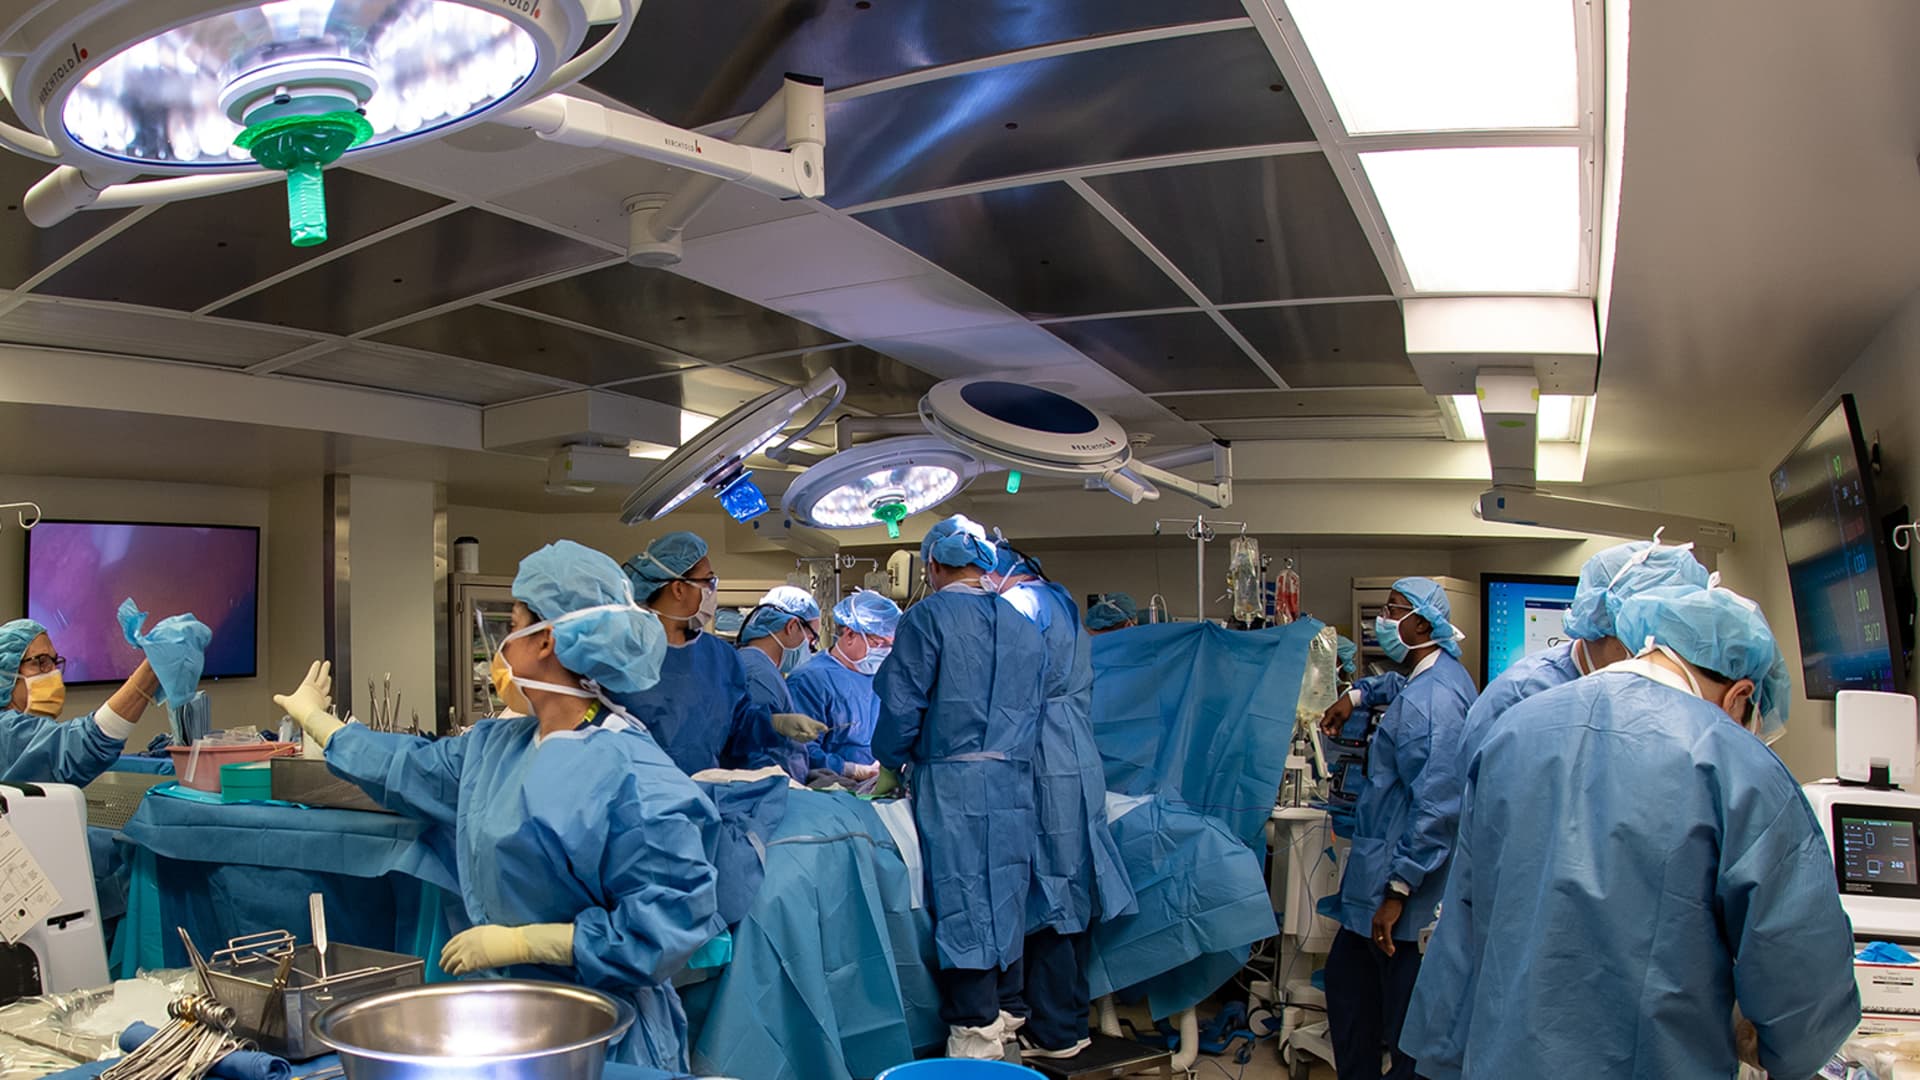 Doctors perform a liver transplant at North Shore University Hospital in Manhasset, New York. The hospital system, Northwell Health, provides financial wellness benefits to its employers.